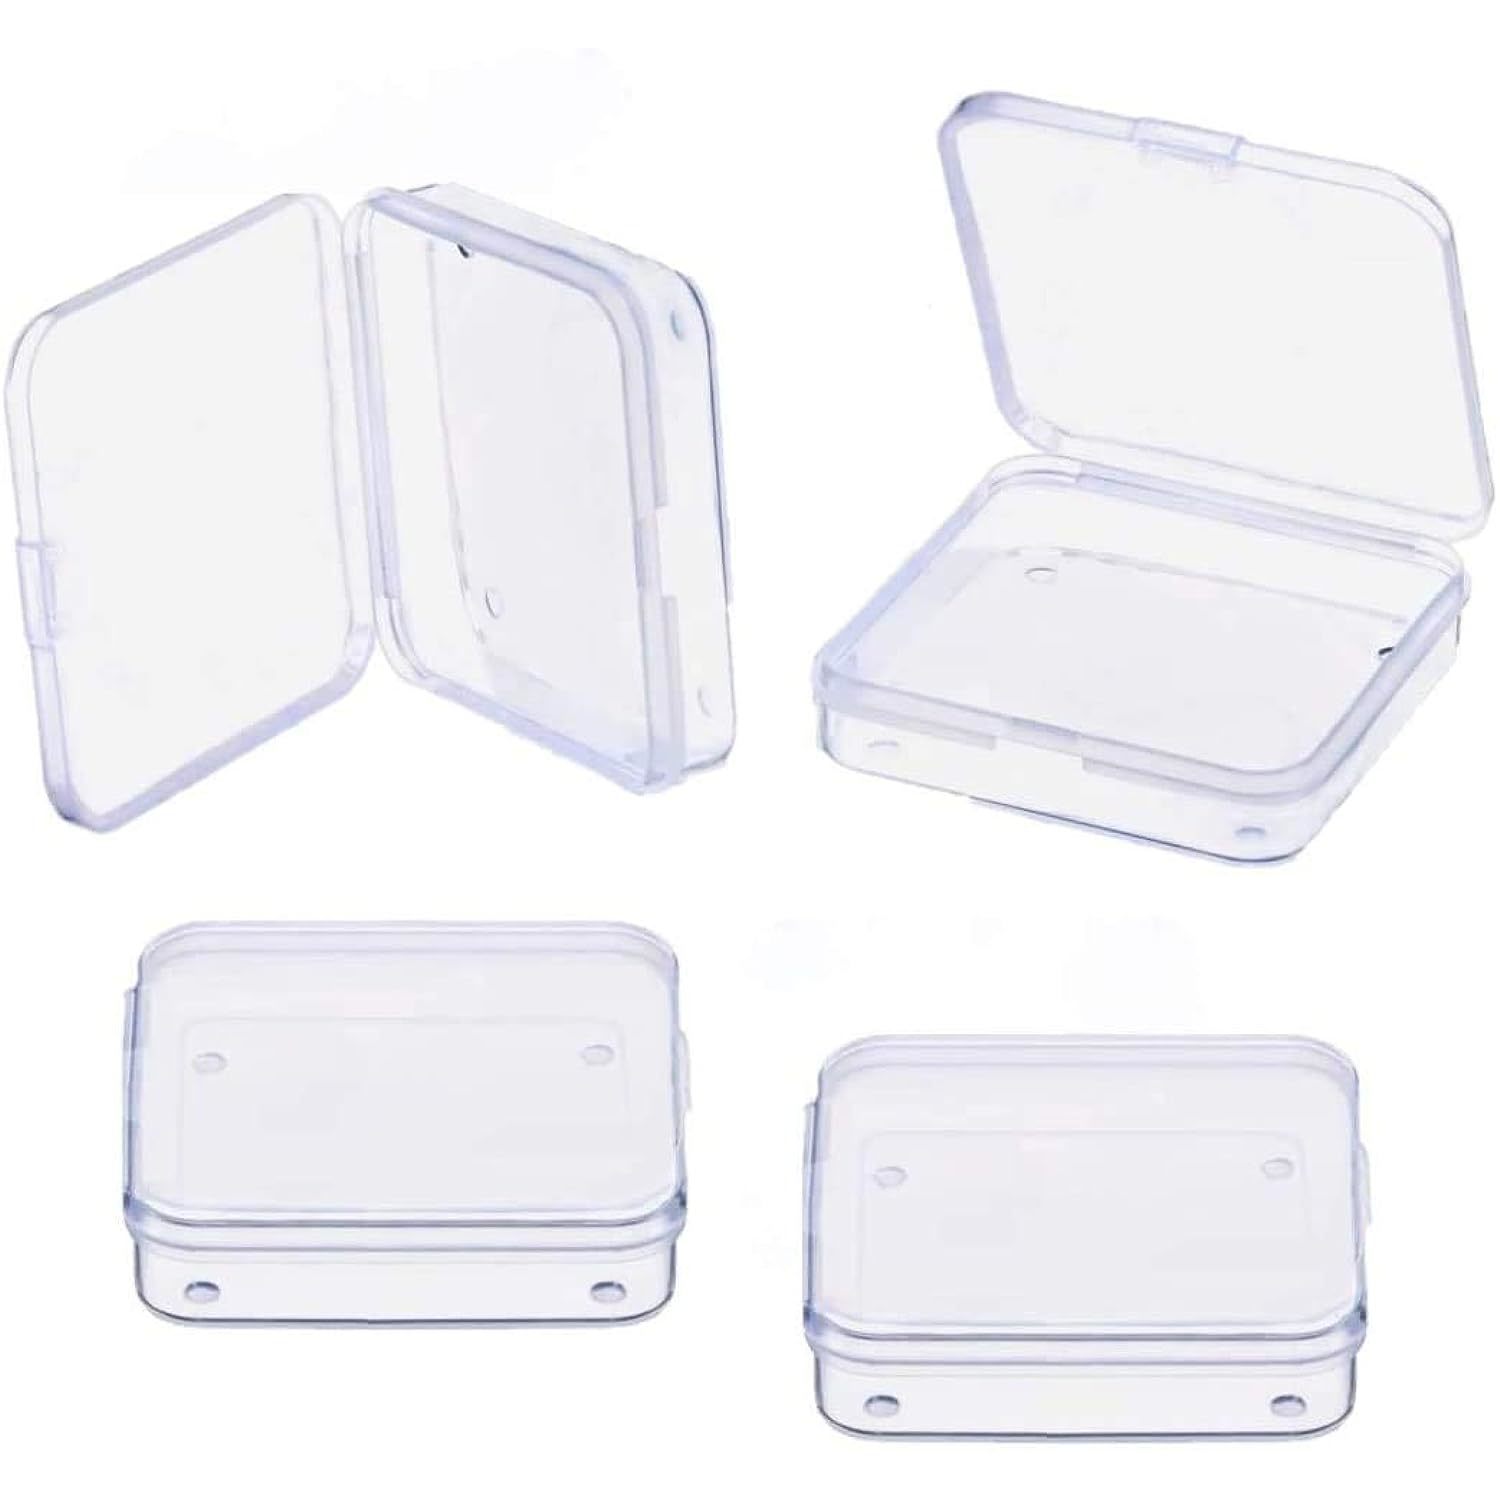  36 Pieces Small Clear Plastic Beads Storage Containers